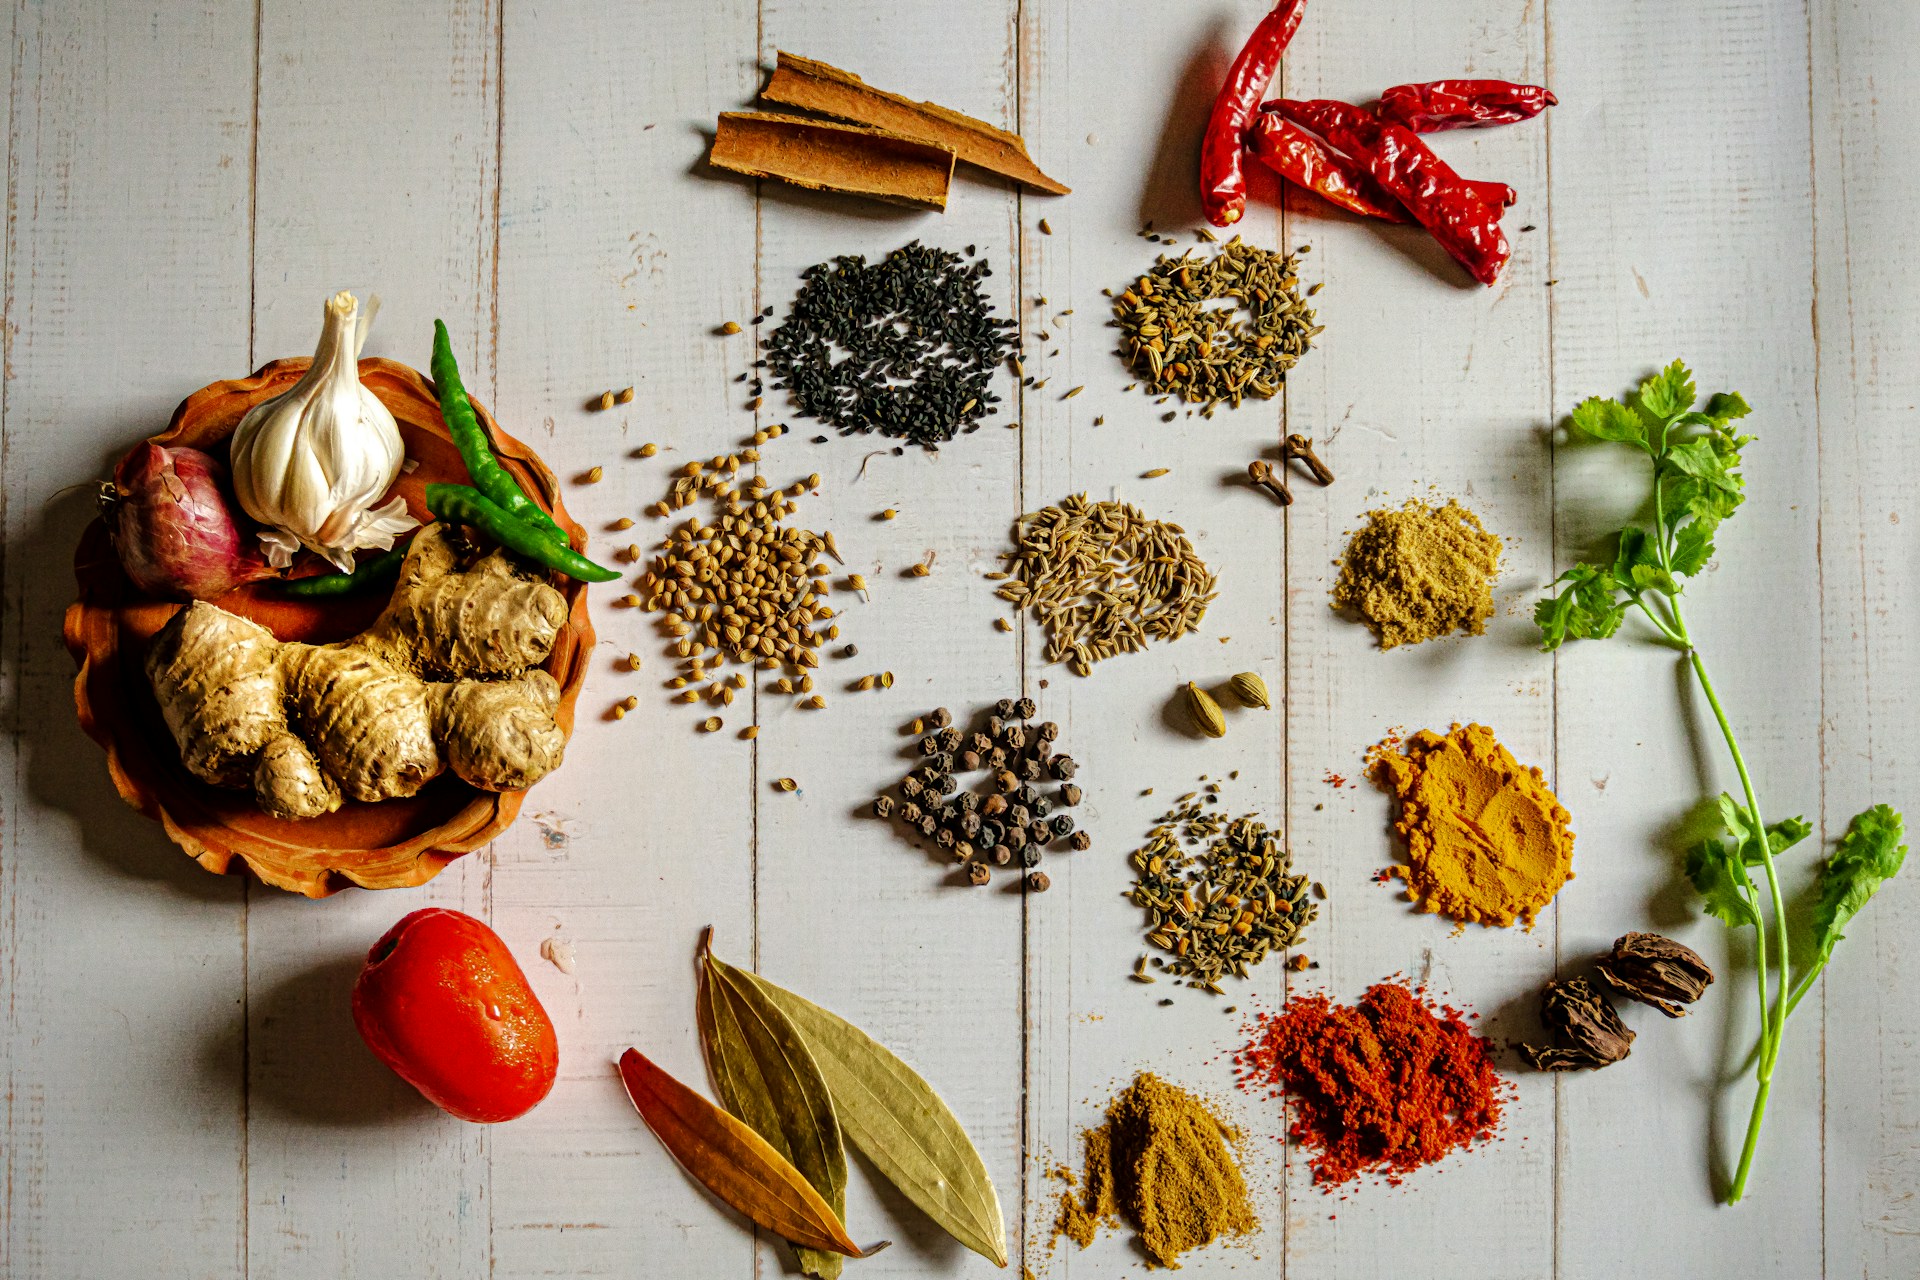 Image of different foods and spices